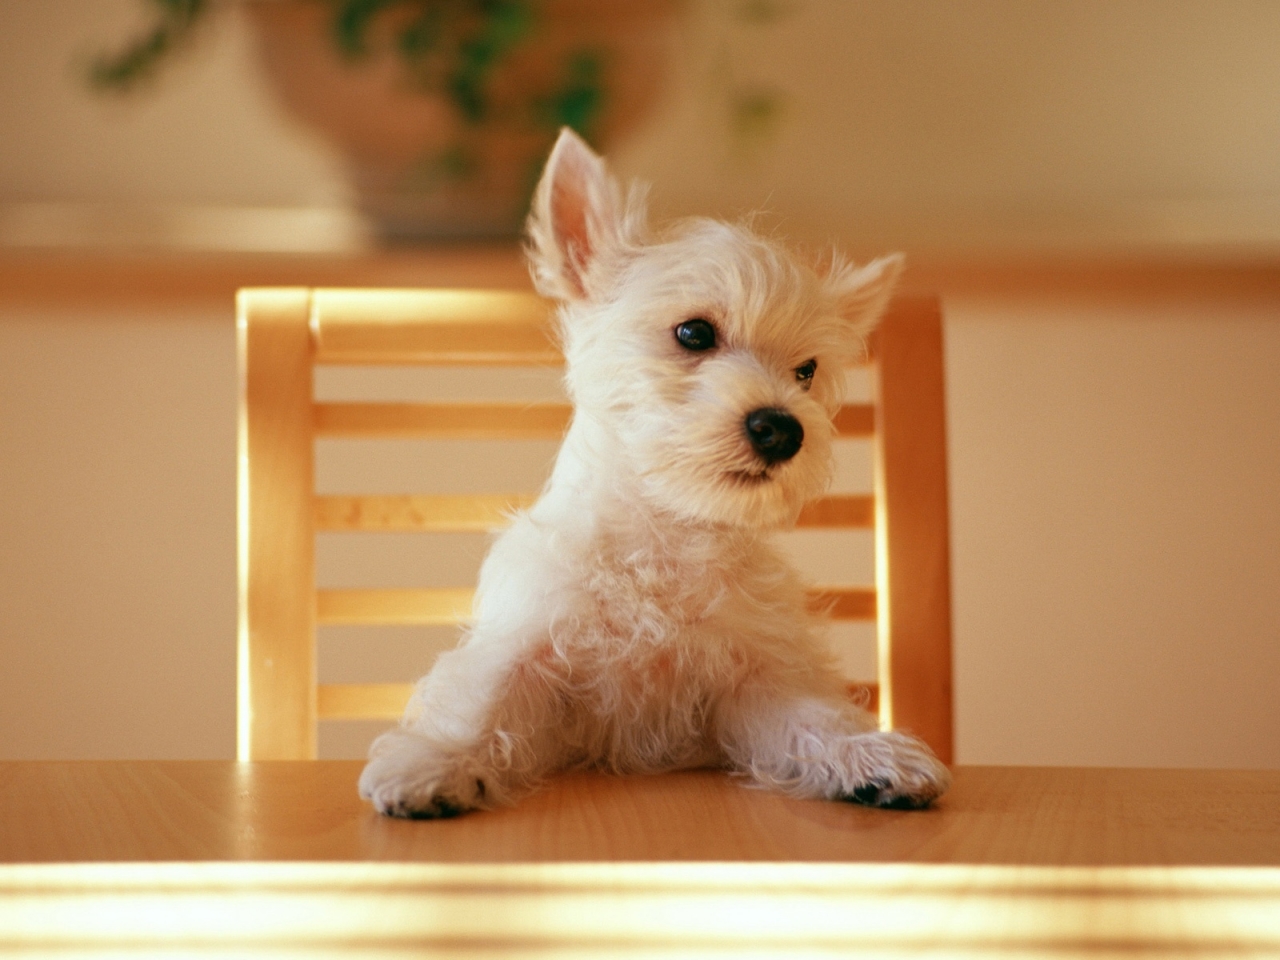 Dog at the table for 1280 x 960 resolution